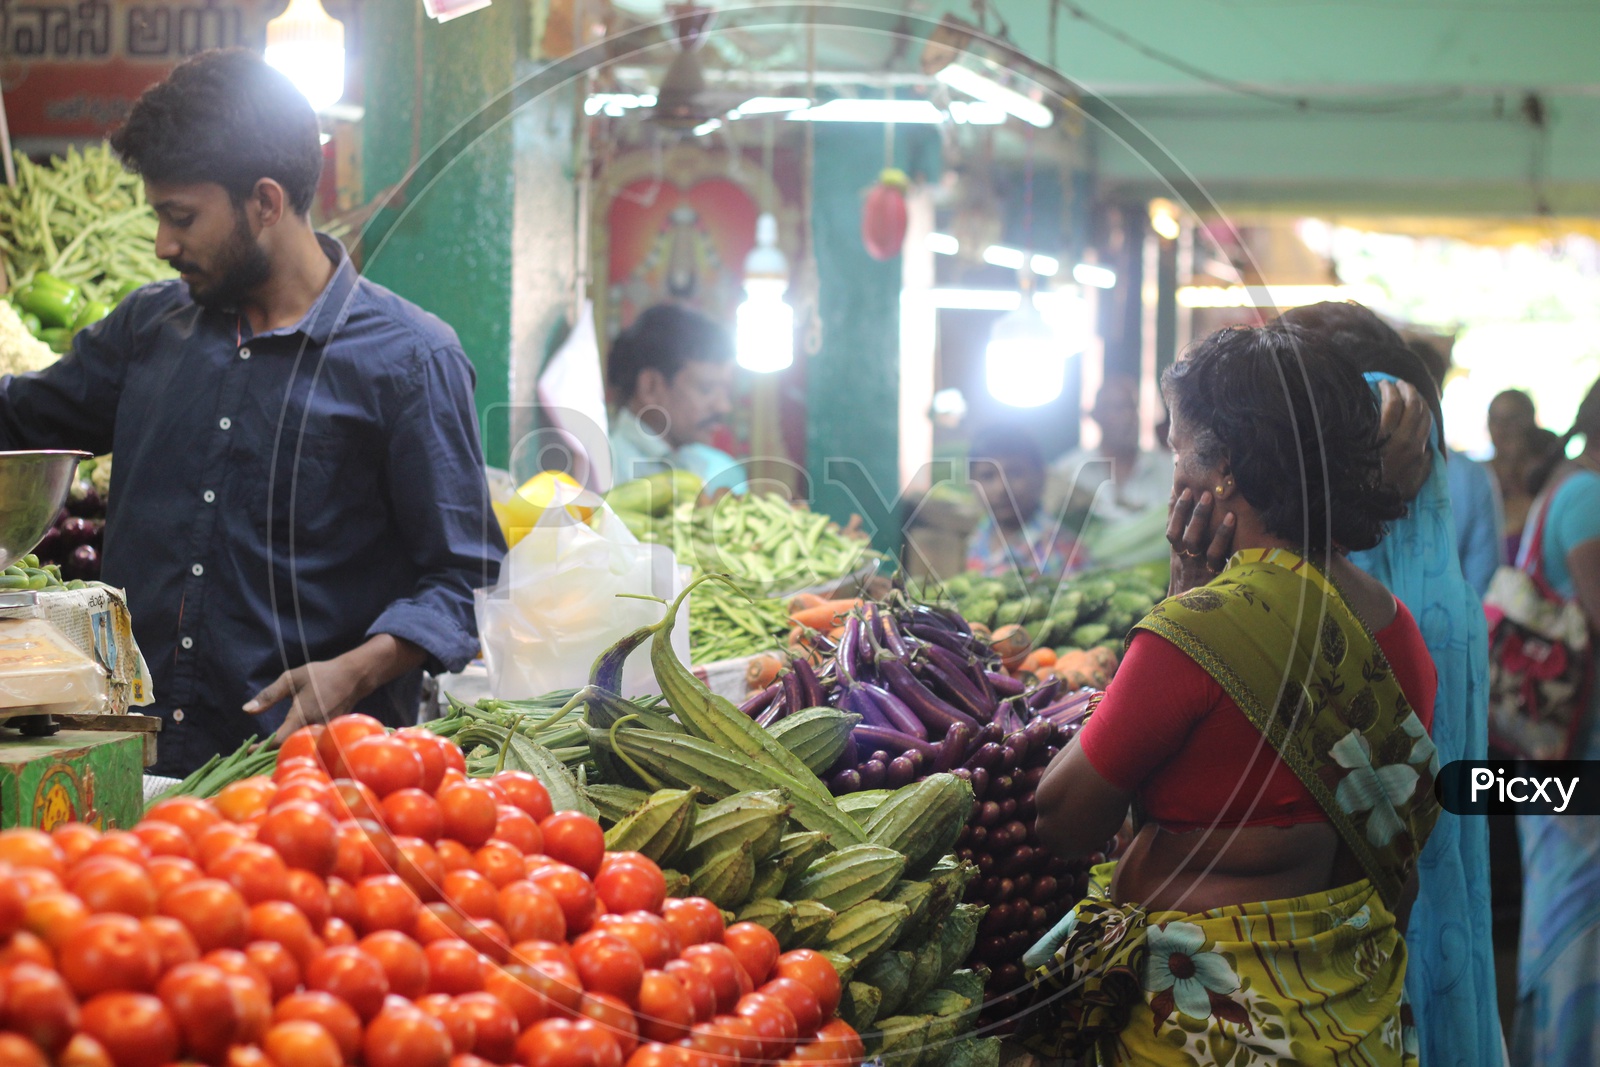 Vegetable Market Scene with buyers and sellers